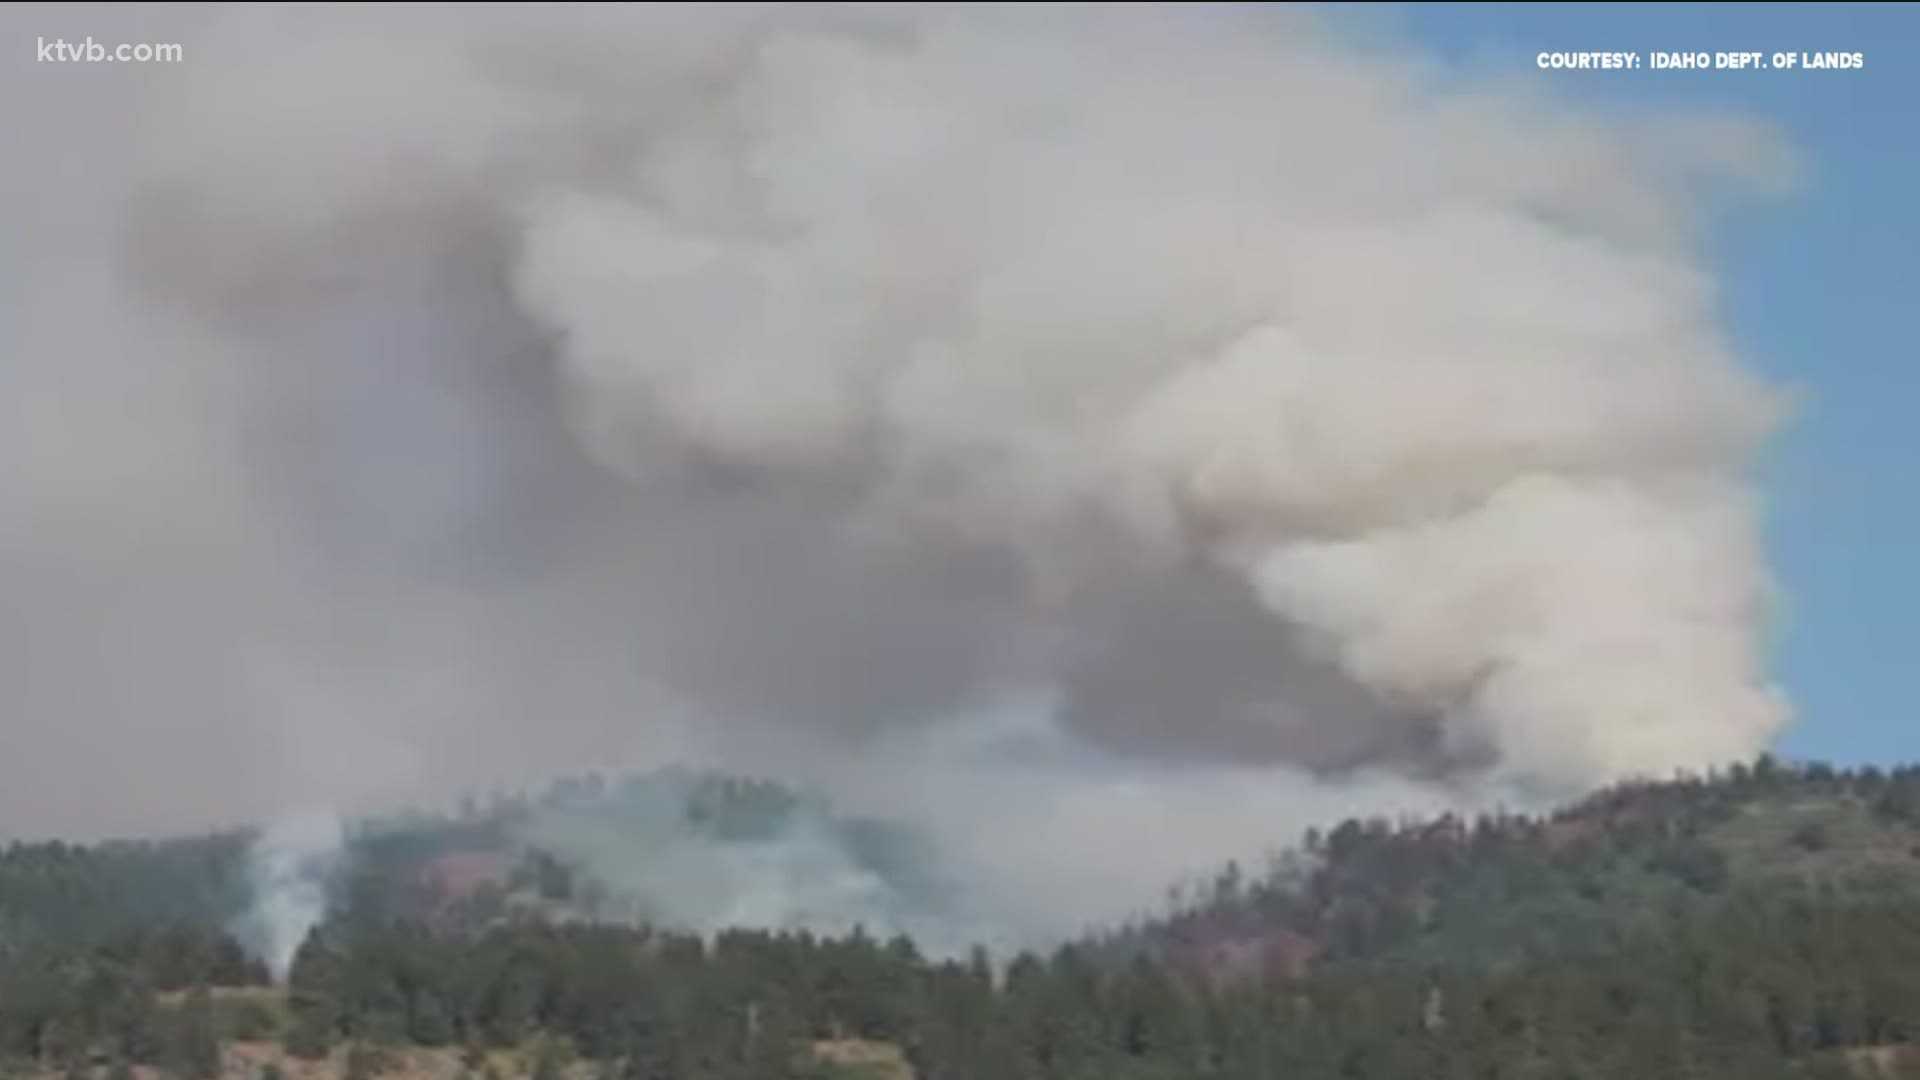 The fire in the Boise National Forest continues to spread as more resources are being brought in to battle the fire.